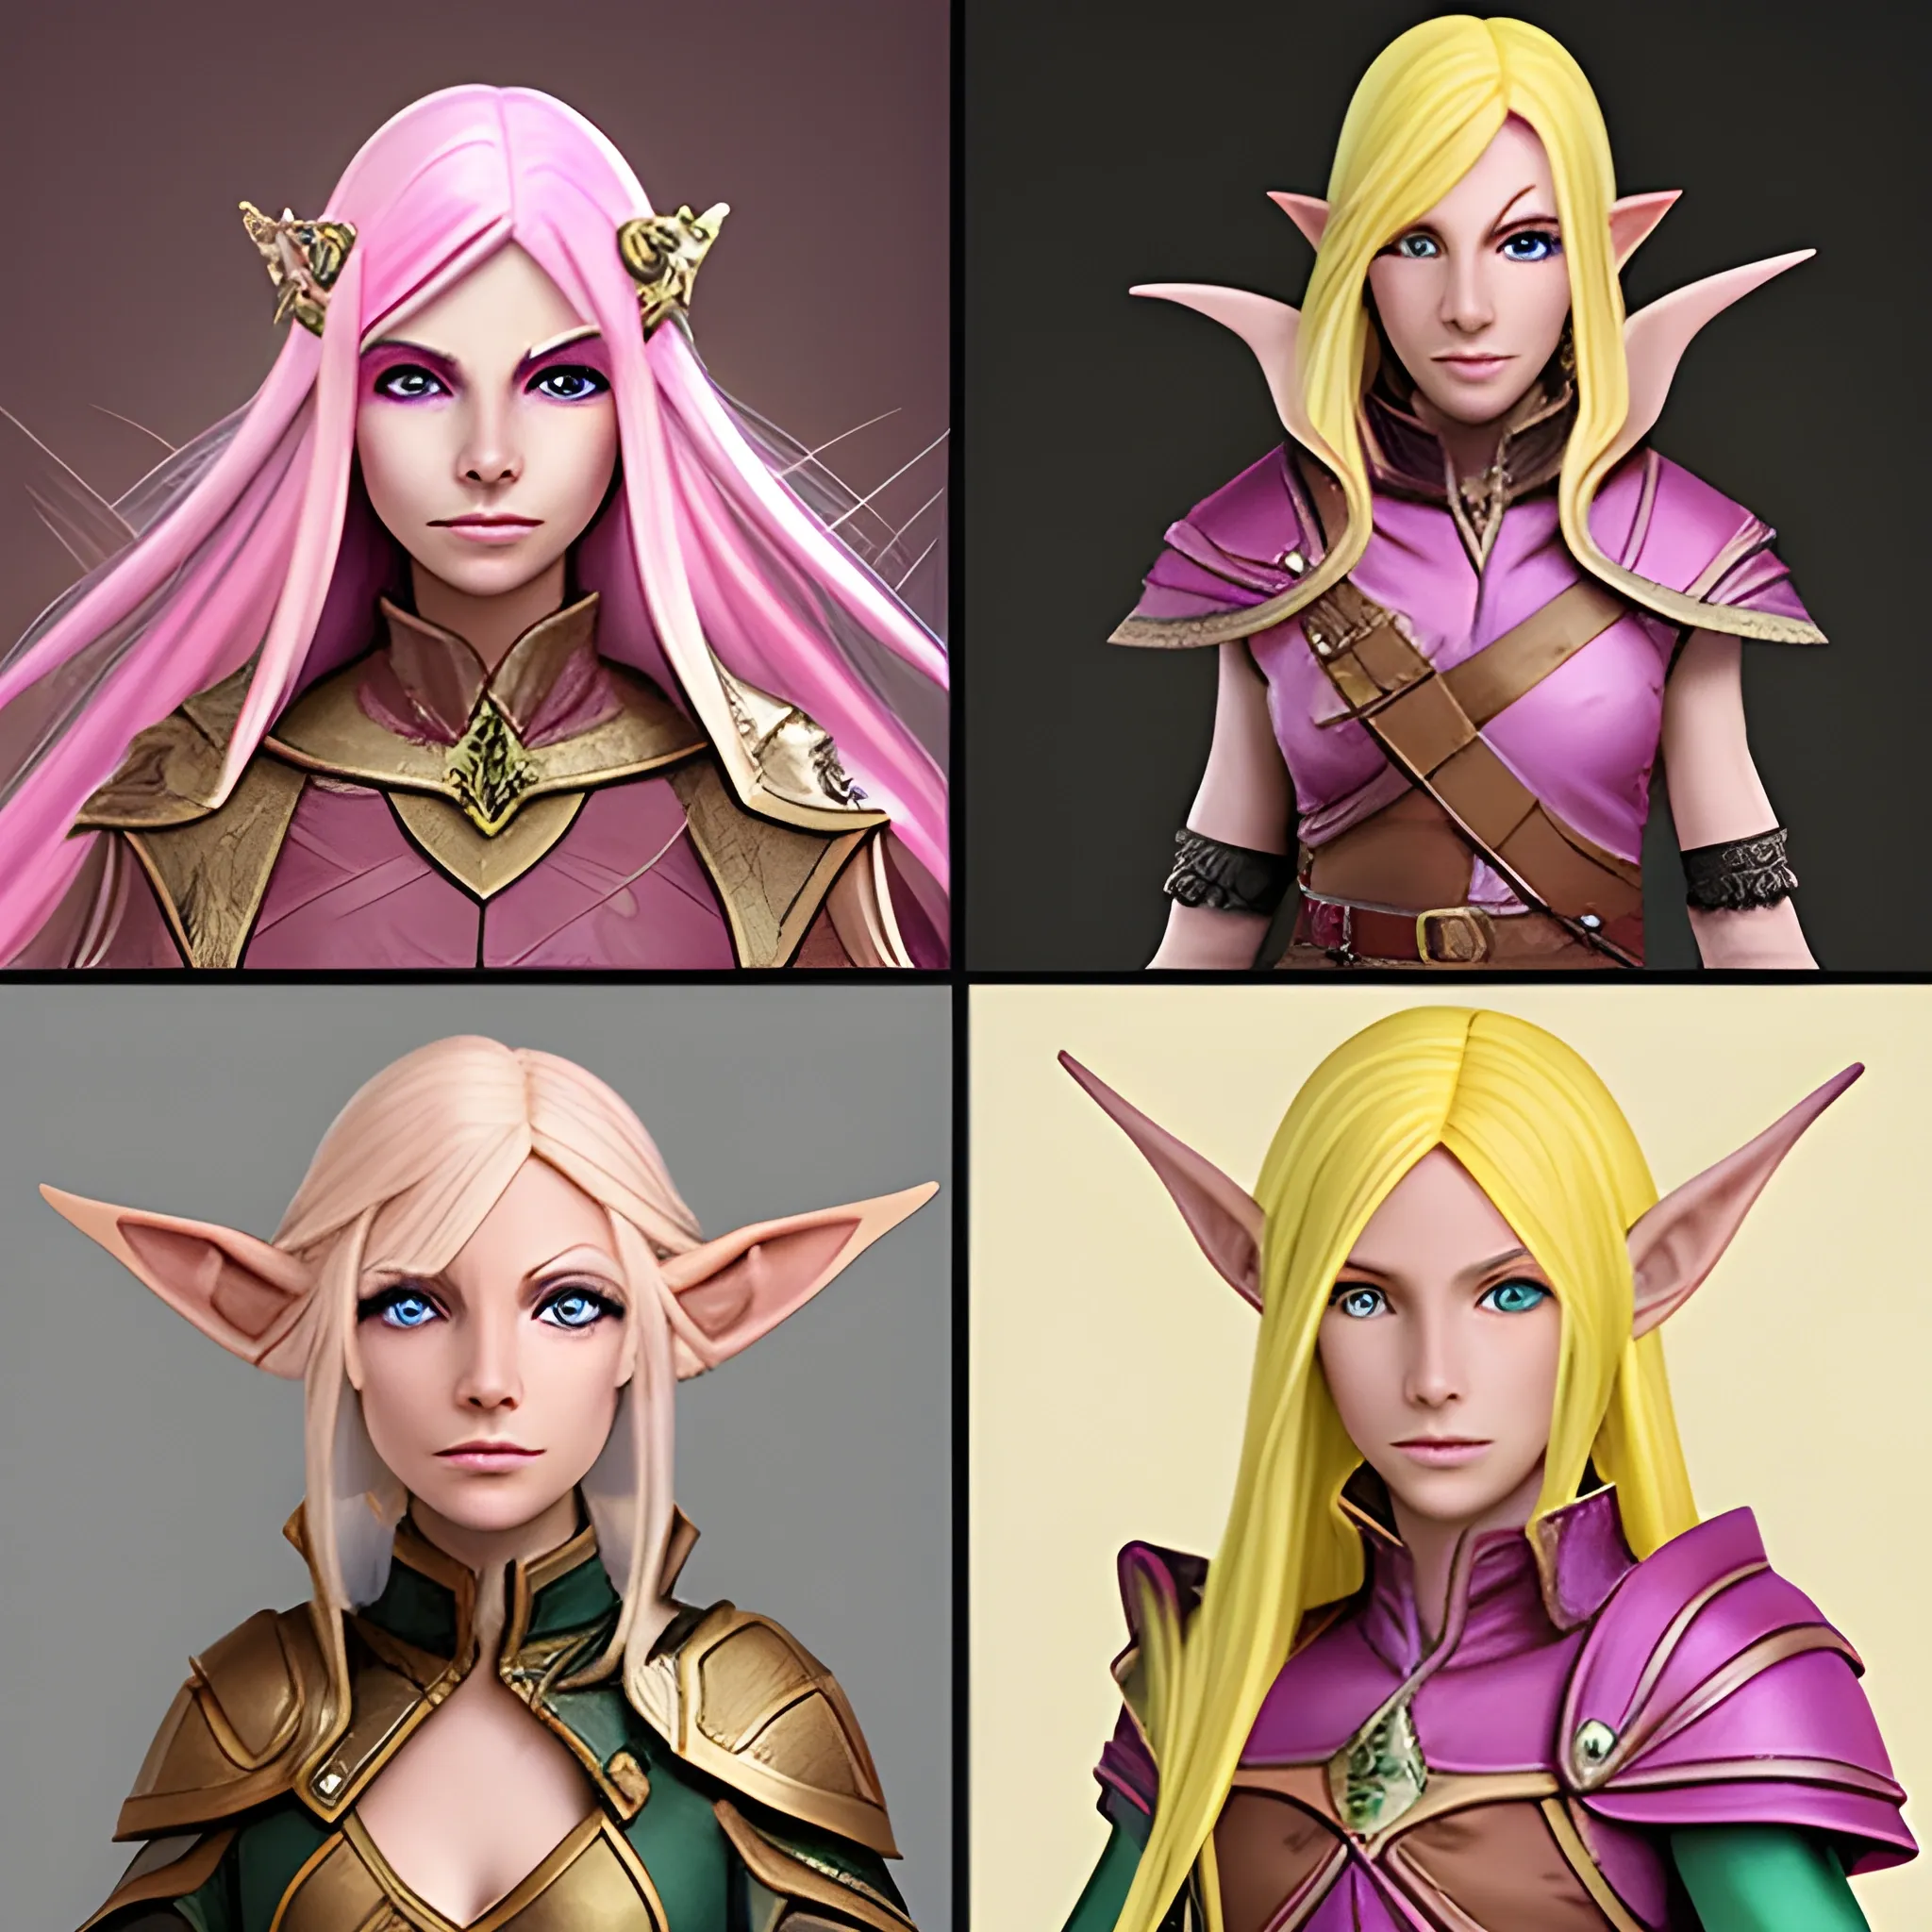 Create a dungeons and dragons character which is an Eladrin Elf female. Yellow hair. Pink clothing. Pink eyes